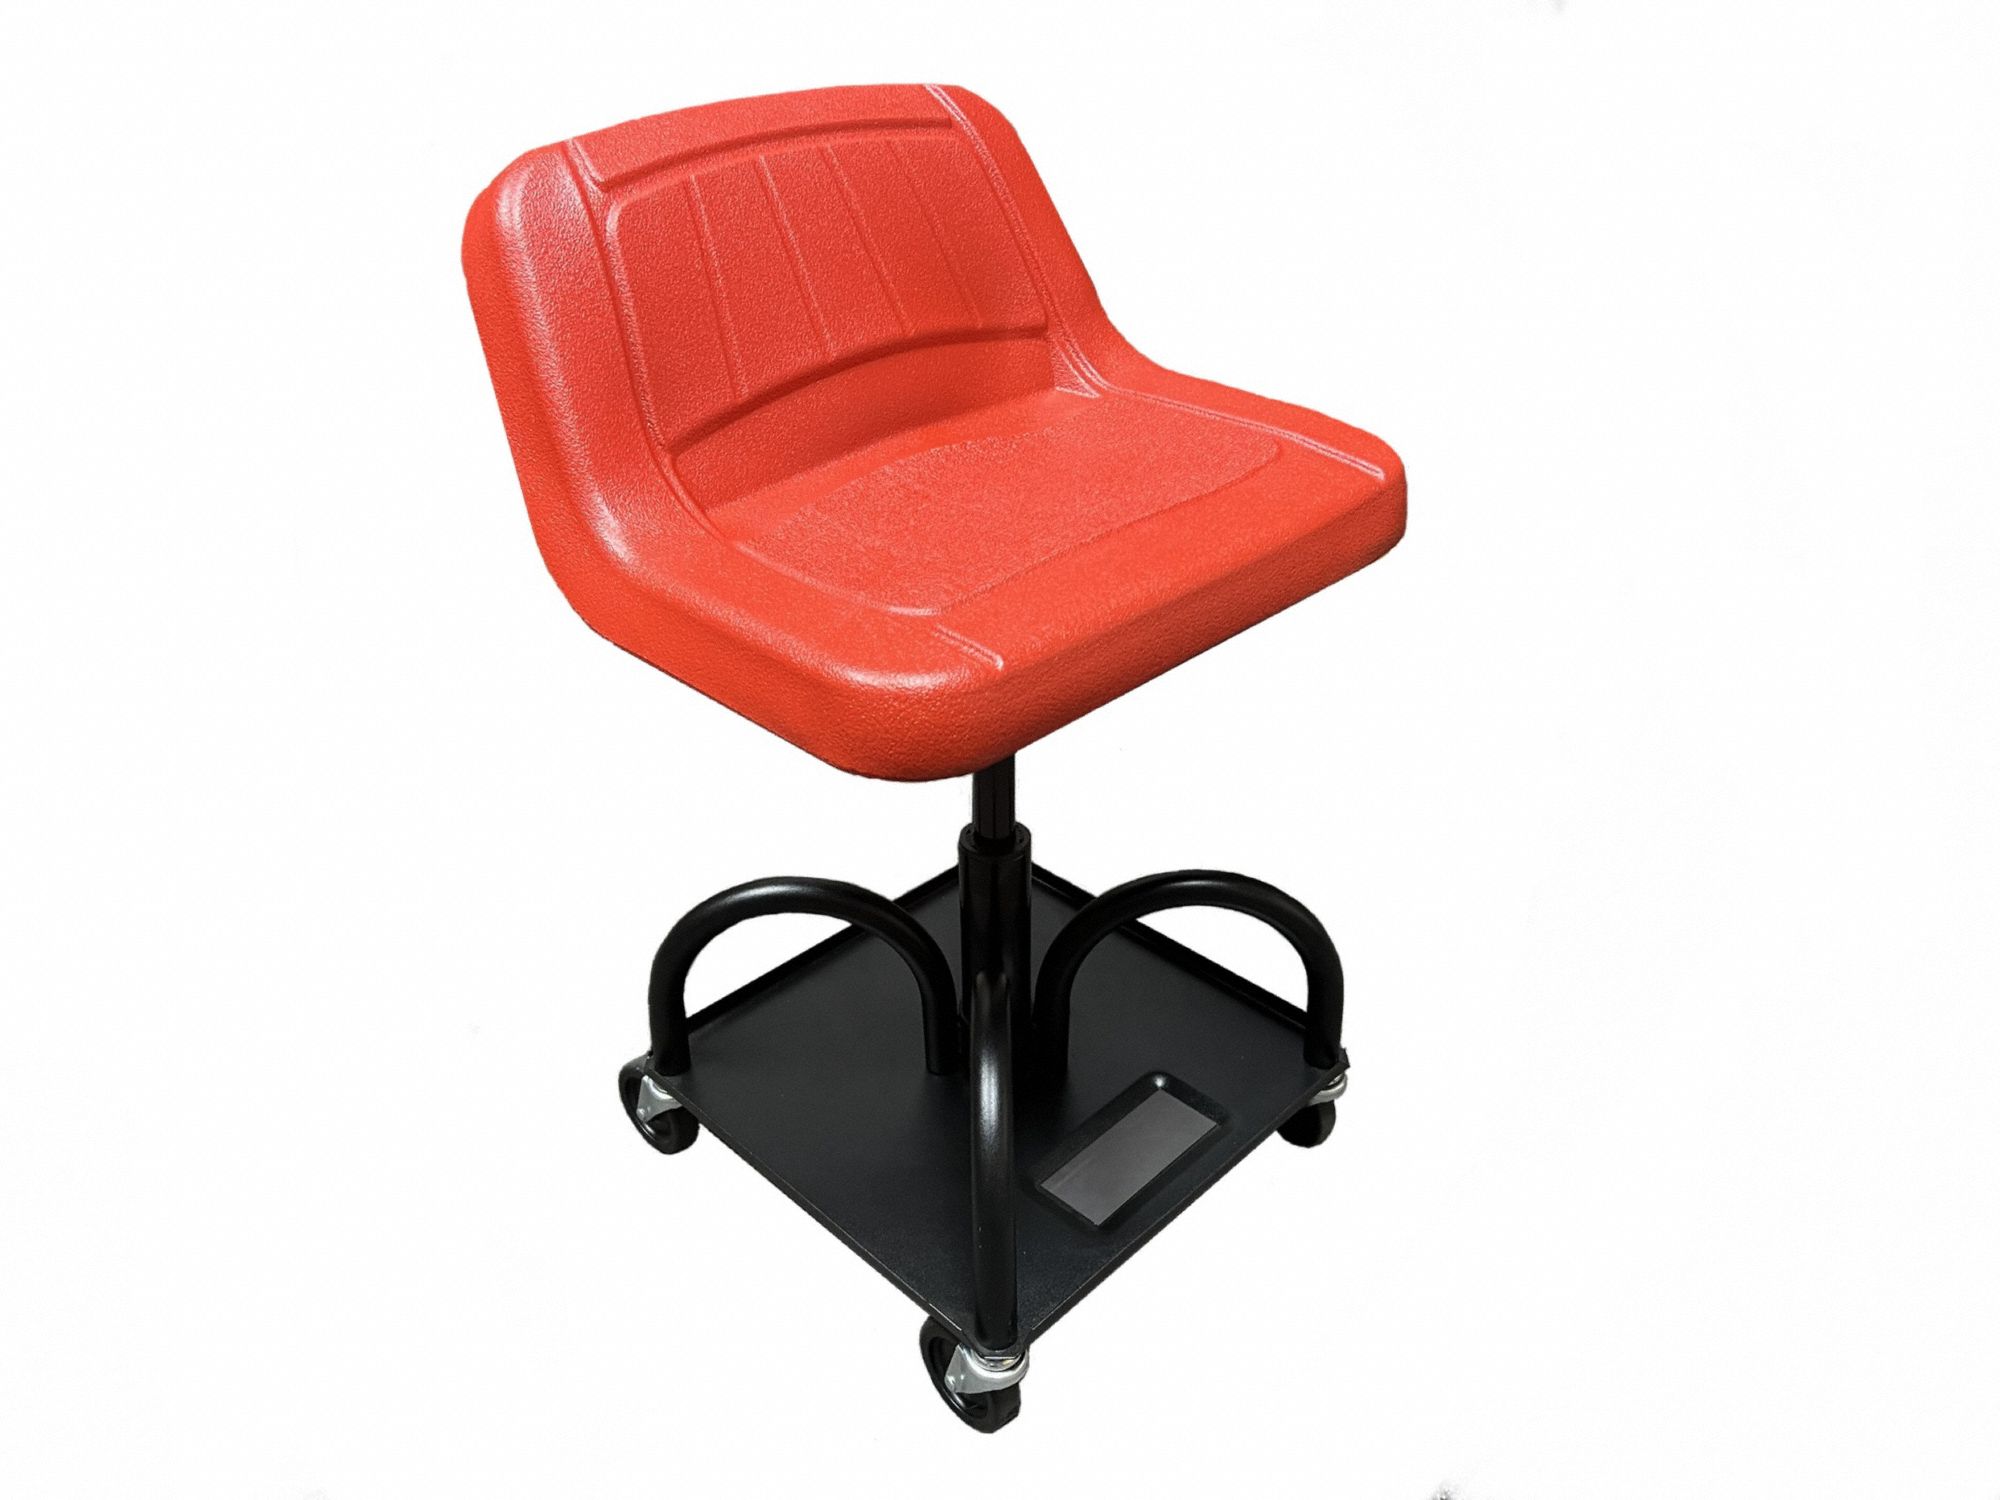 Mechanic Seat: Heavy-Duty, Adjustable, 480 lb Max Load Capacity, 27 in Seat Ht, 22 in Overall Ht